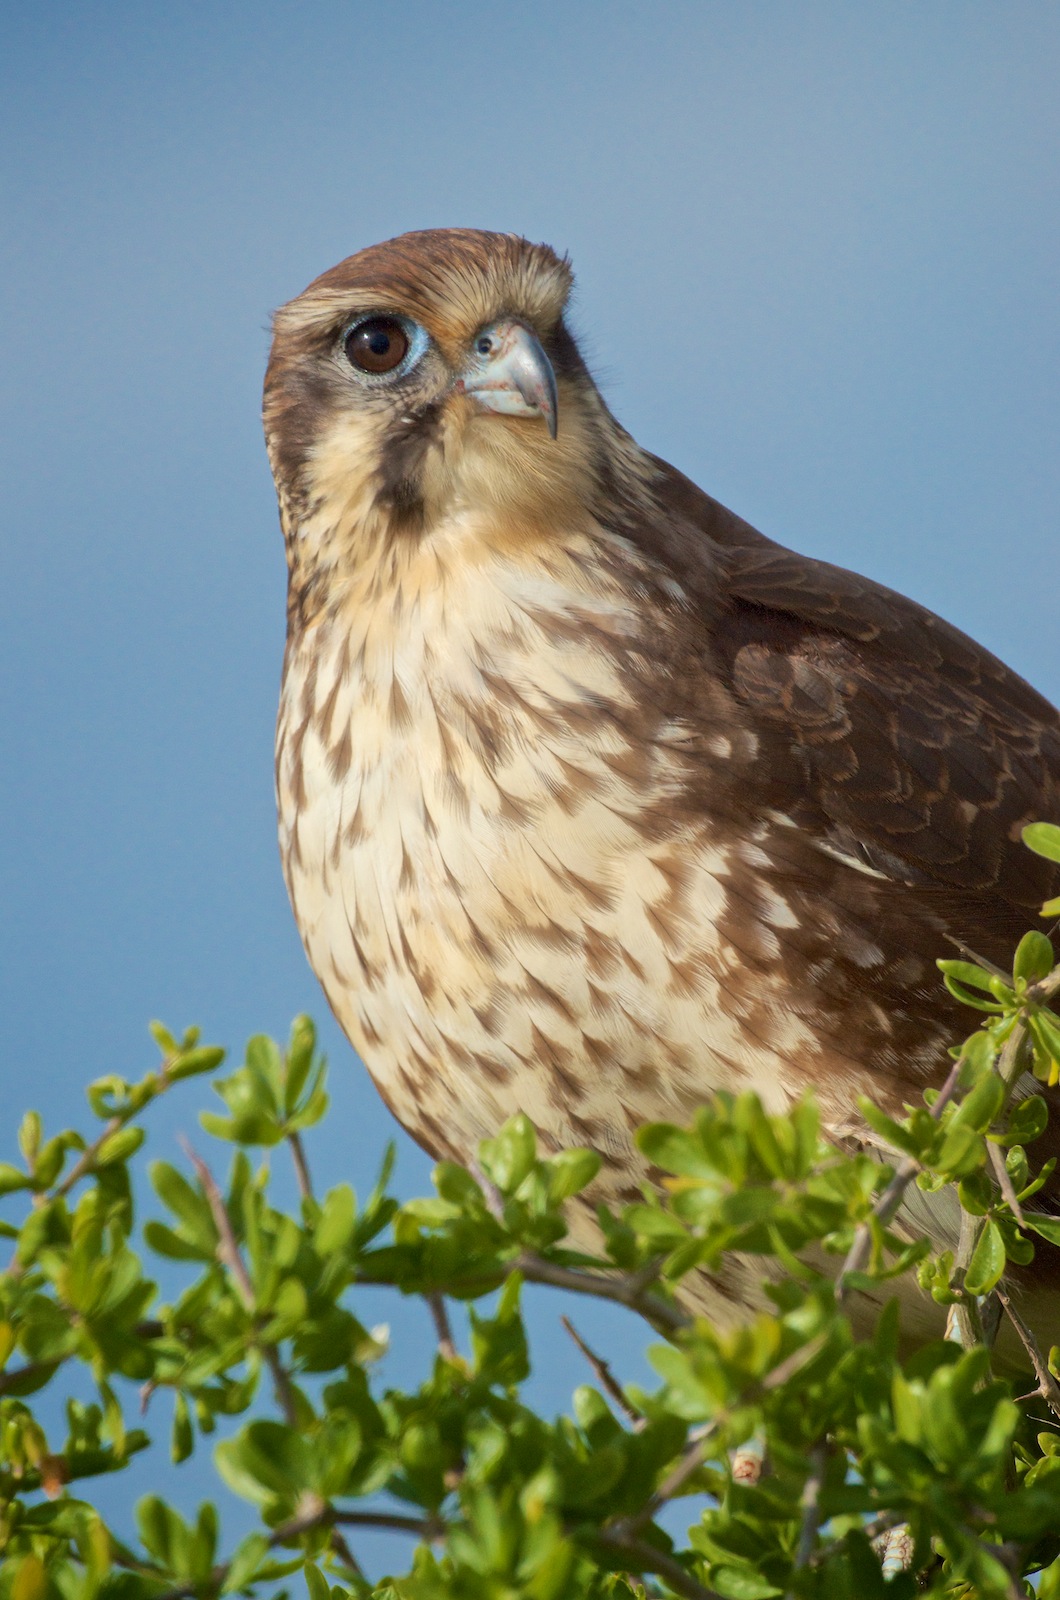 This Brown Falcon was hardly camera shy. We think he might be Elvis in disguise.